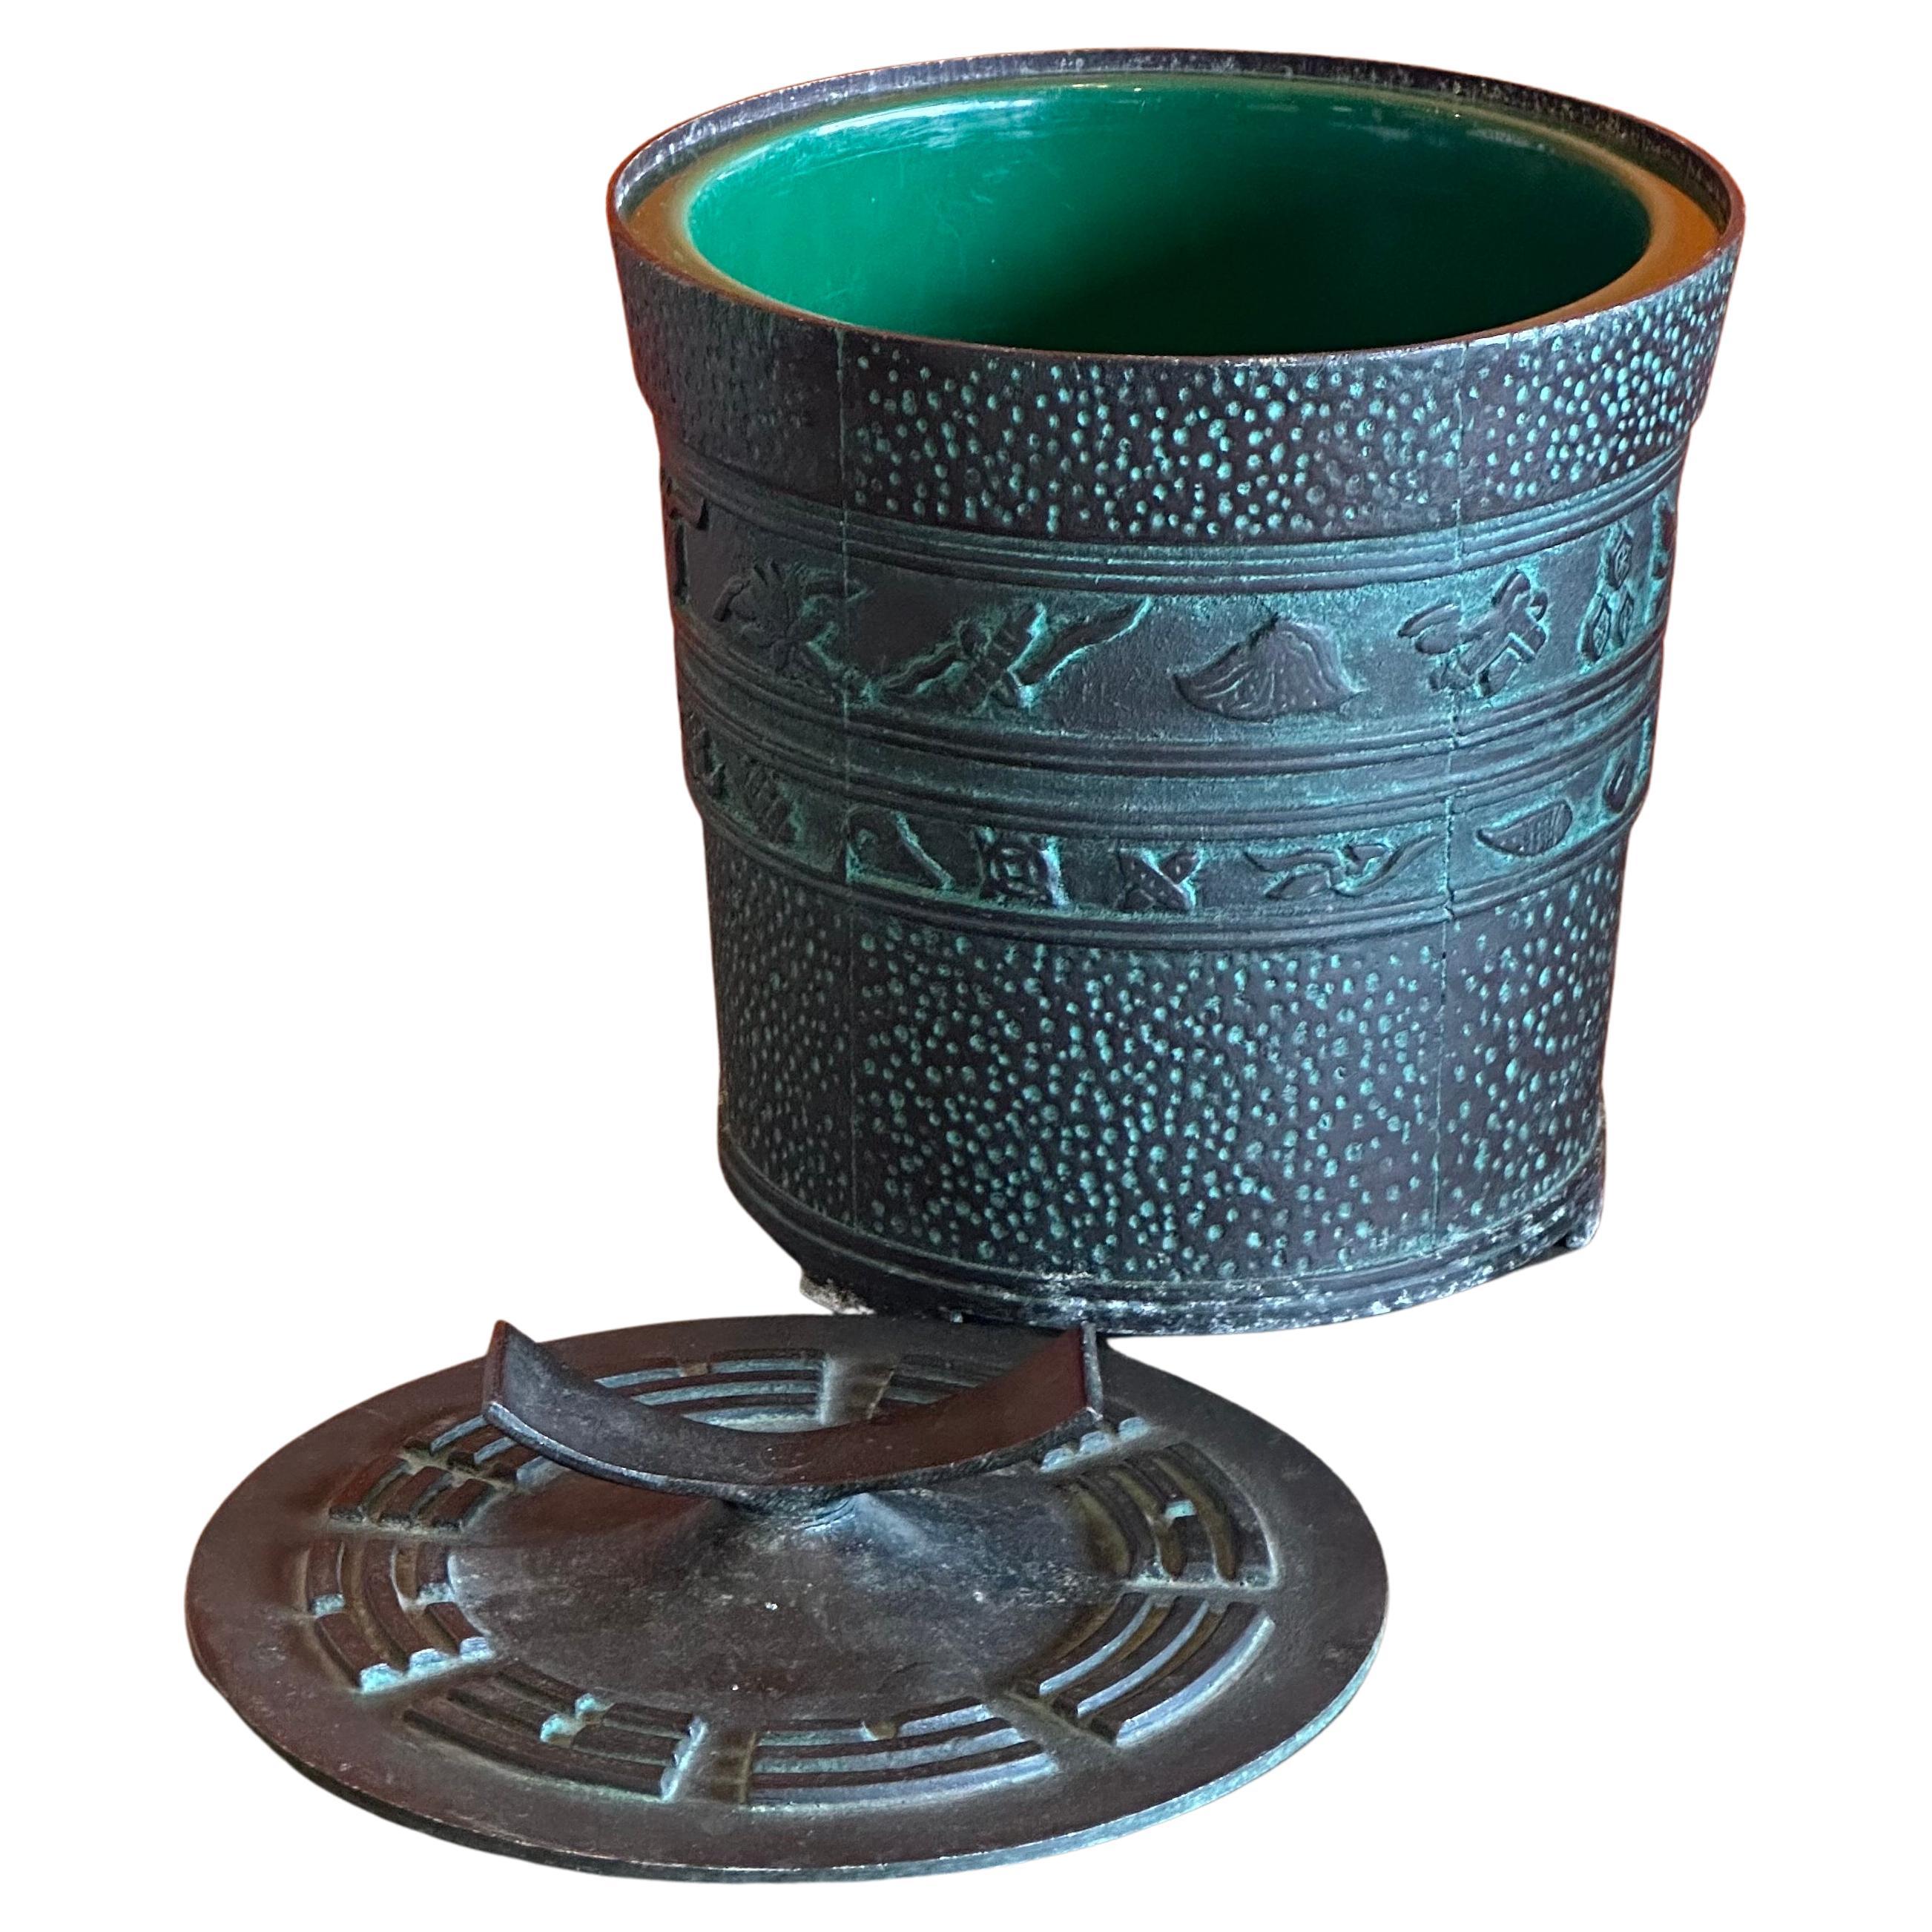 VA very rare and hard to find vntage faux bronze Chinese lidded ice bucket in the style of James Mont by Getz Bros, circa 1960s.   The bucket is made of cast metal with inner plastic liner and a patinated bronze finish.  The style is frequently